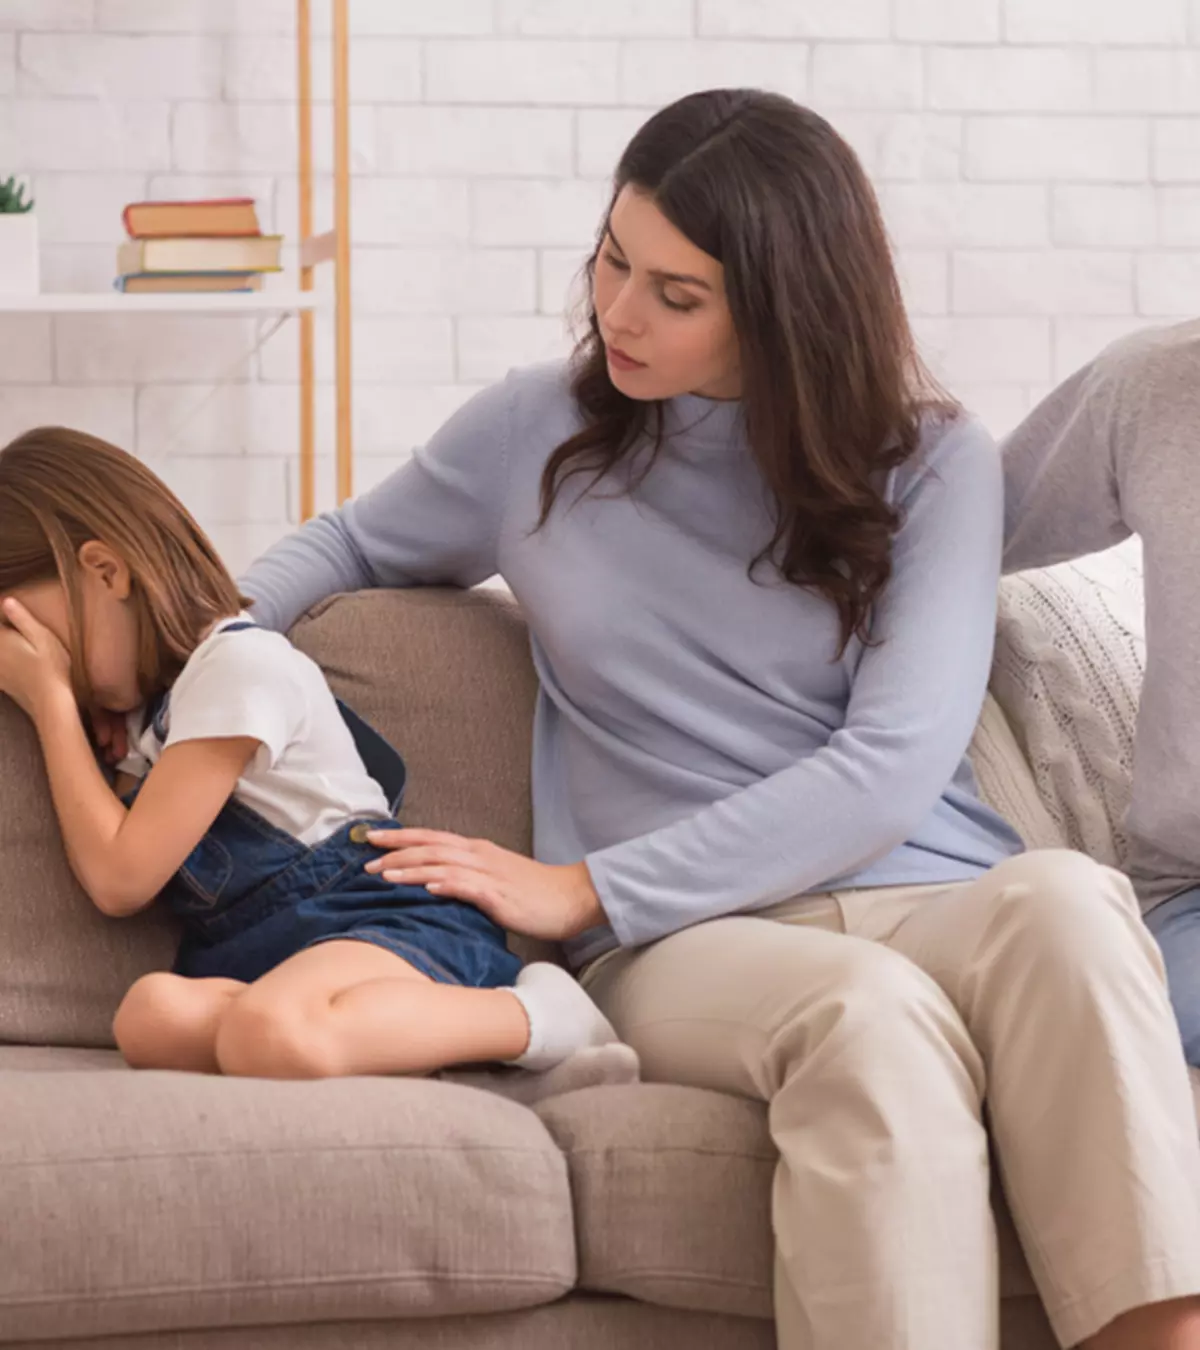 Psychological Problems That Arise Because Of Improper Parenting